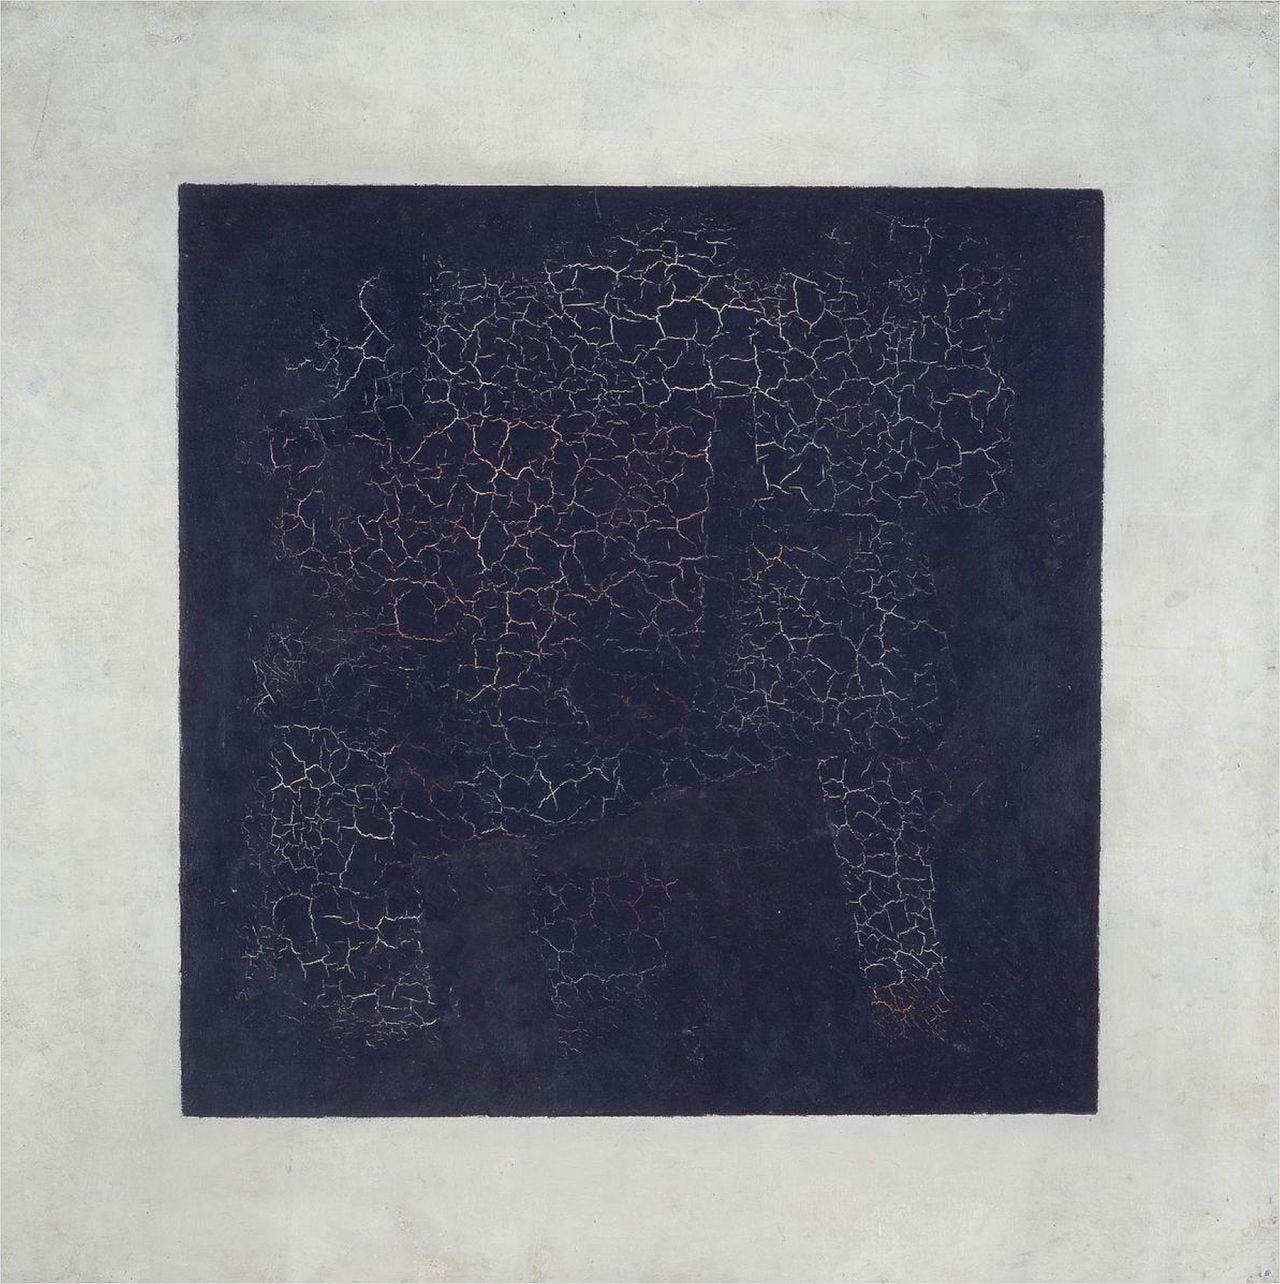 1280px-Kazimir_Malevich,_1915,_Black_Suprematic_Square,_oil_on_linen_canvas,_79.5_x_79.5_cm,_Tretyakov_Gallery,_Moscow